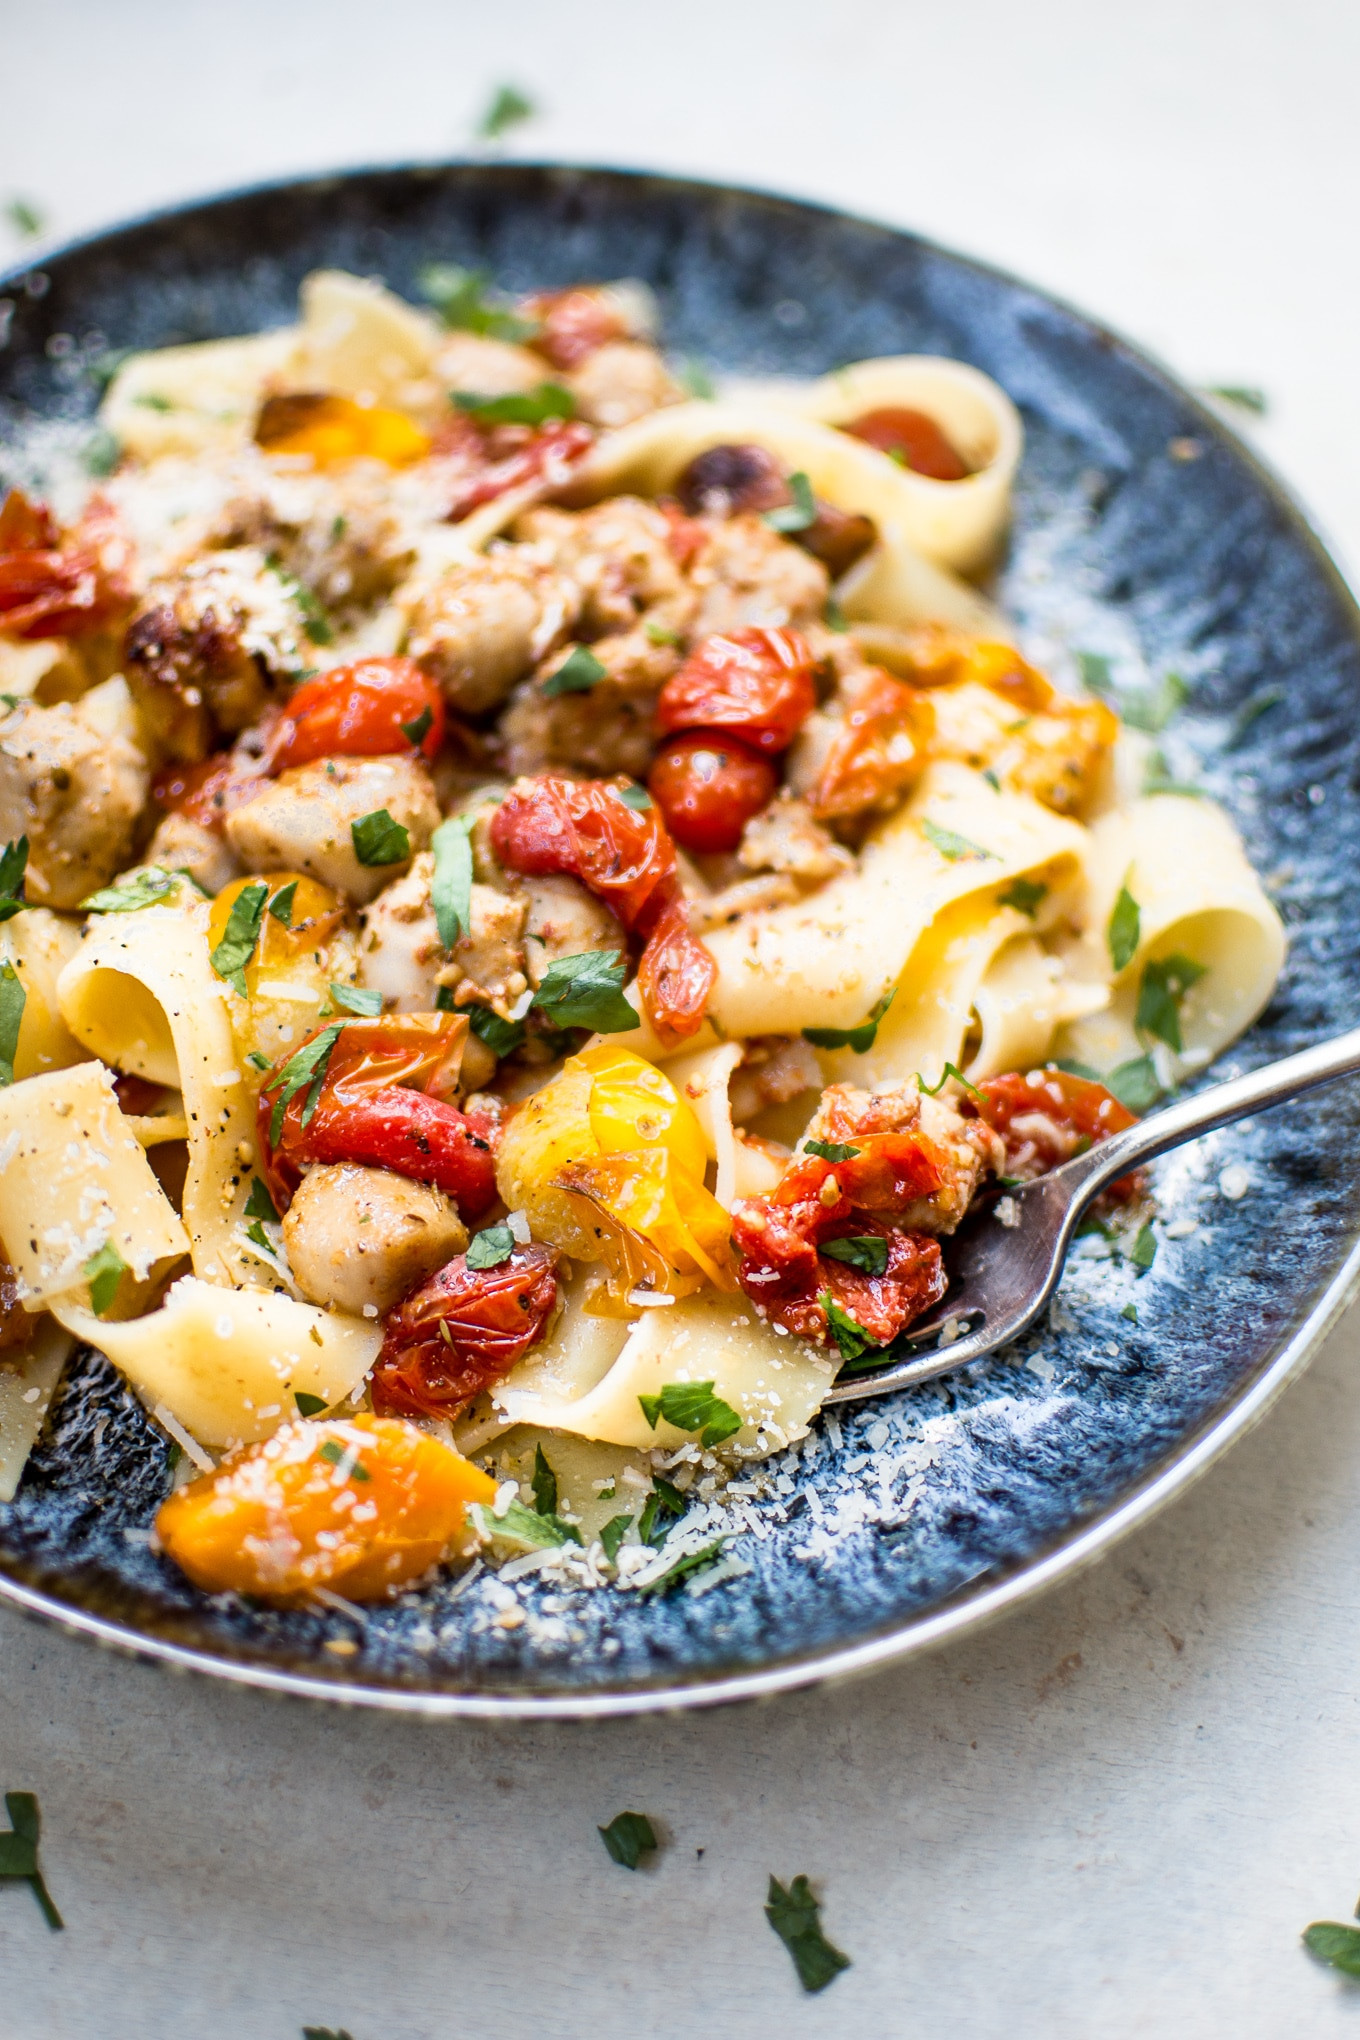 Chicken And Sausage Recipes Pasta
 Healthy Chicken Sausage Pasta with Roasted Tomatoes • Salt